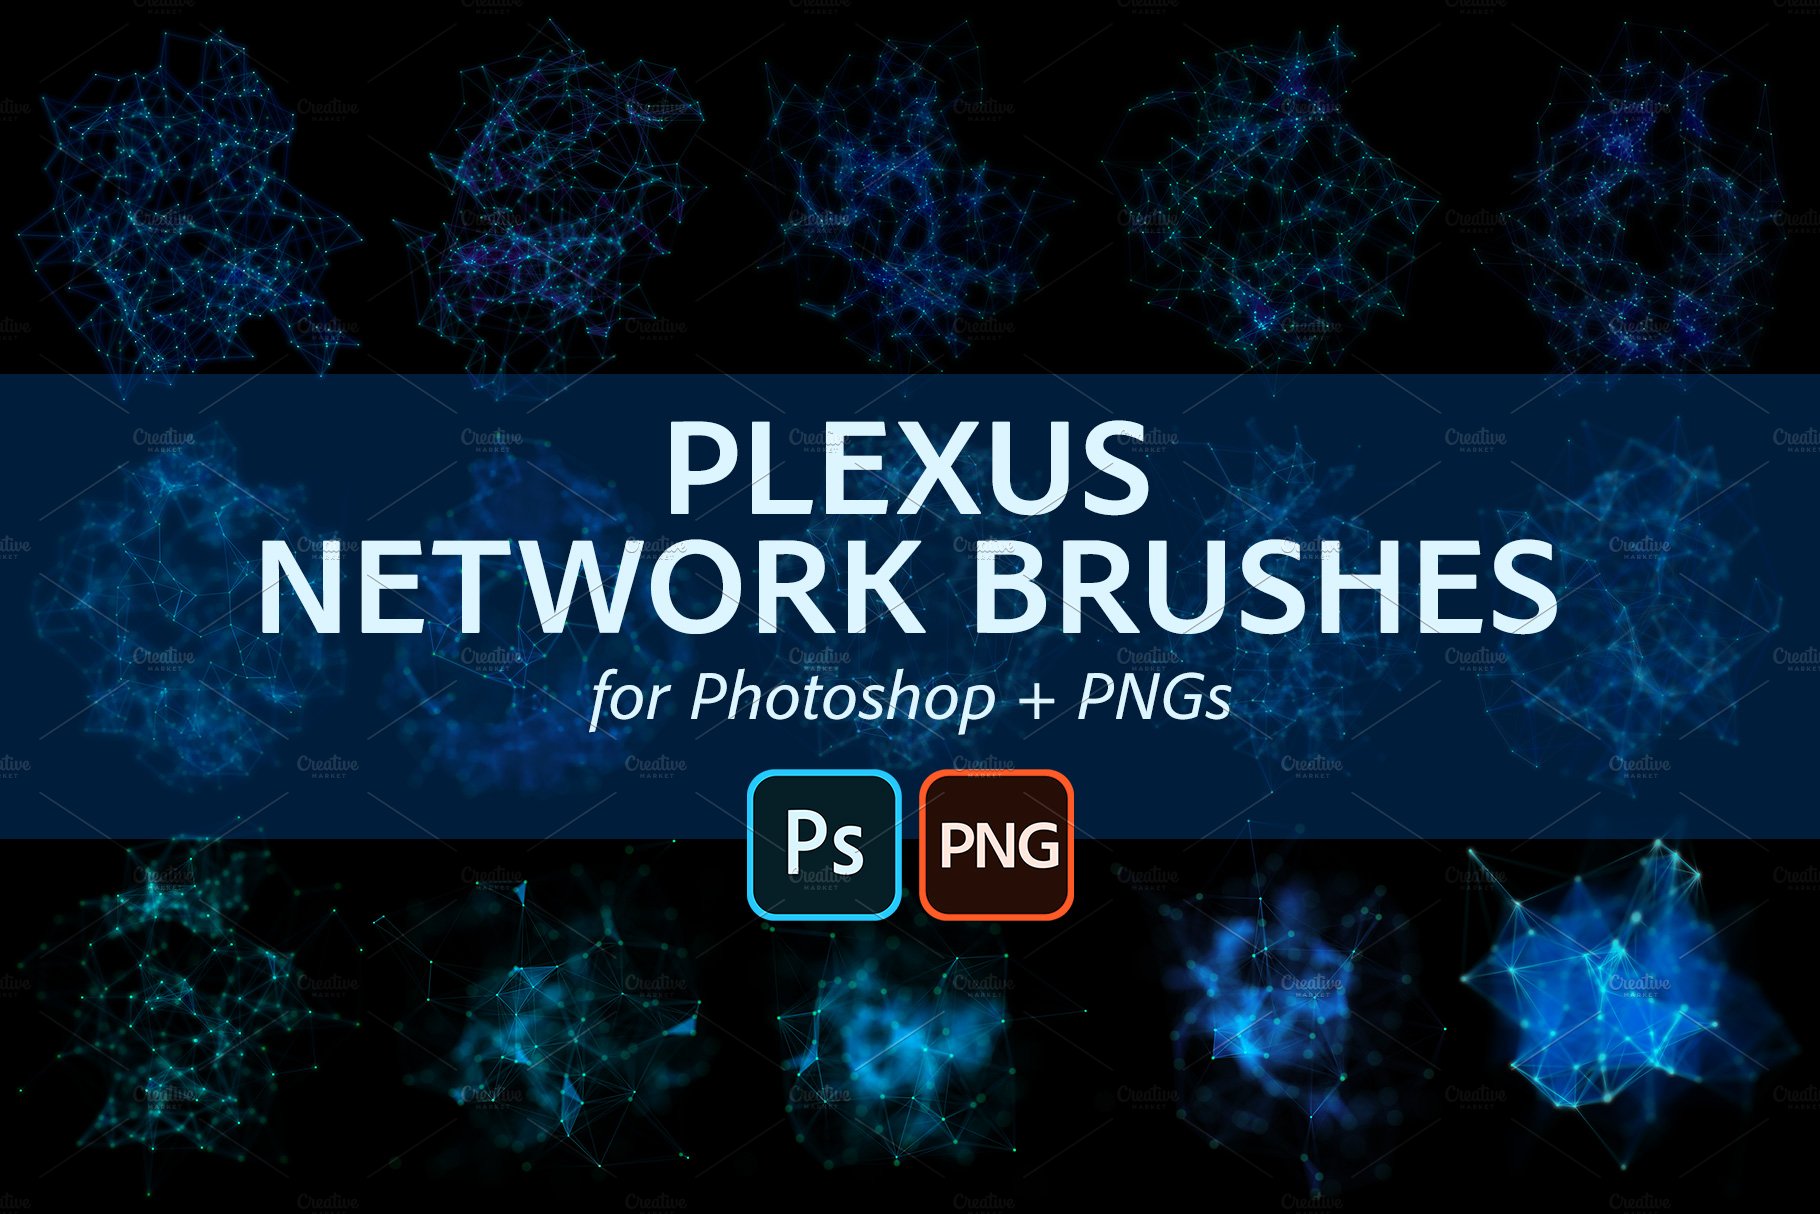 Plexus Network PS Brushes and PNGspreview image.